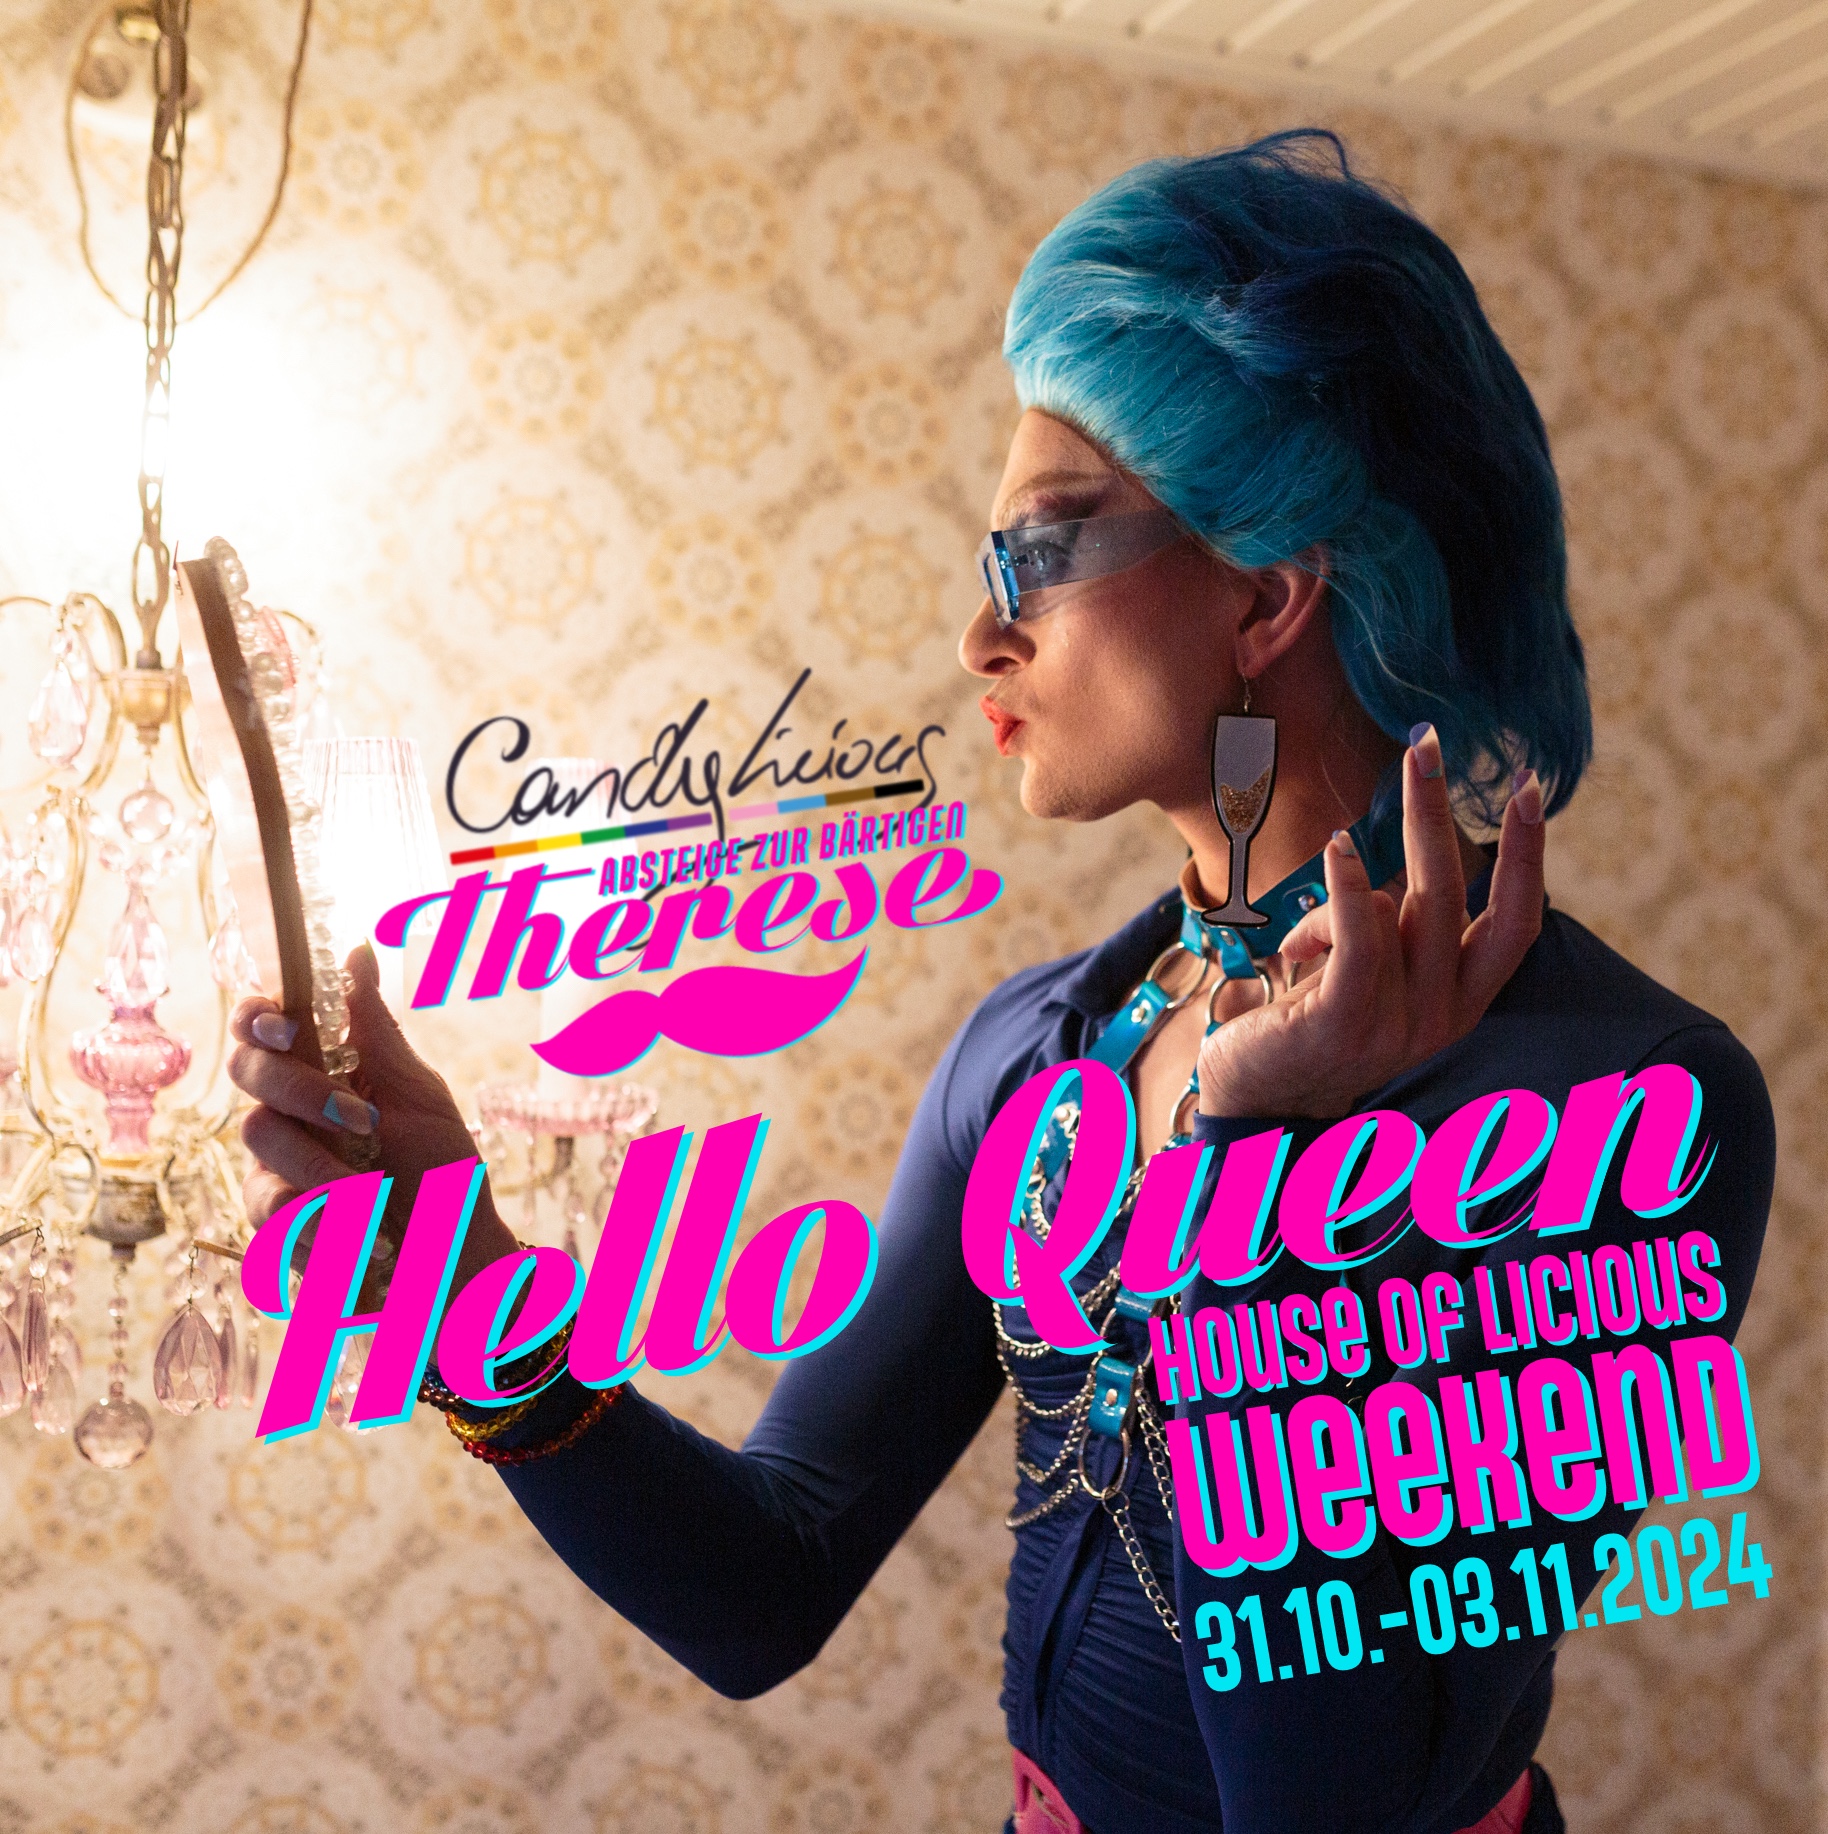 HELLOQUEEN – House of Licious Weekend